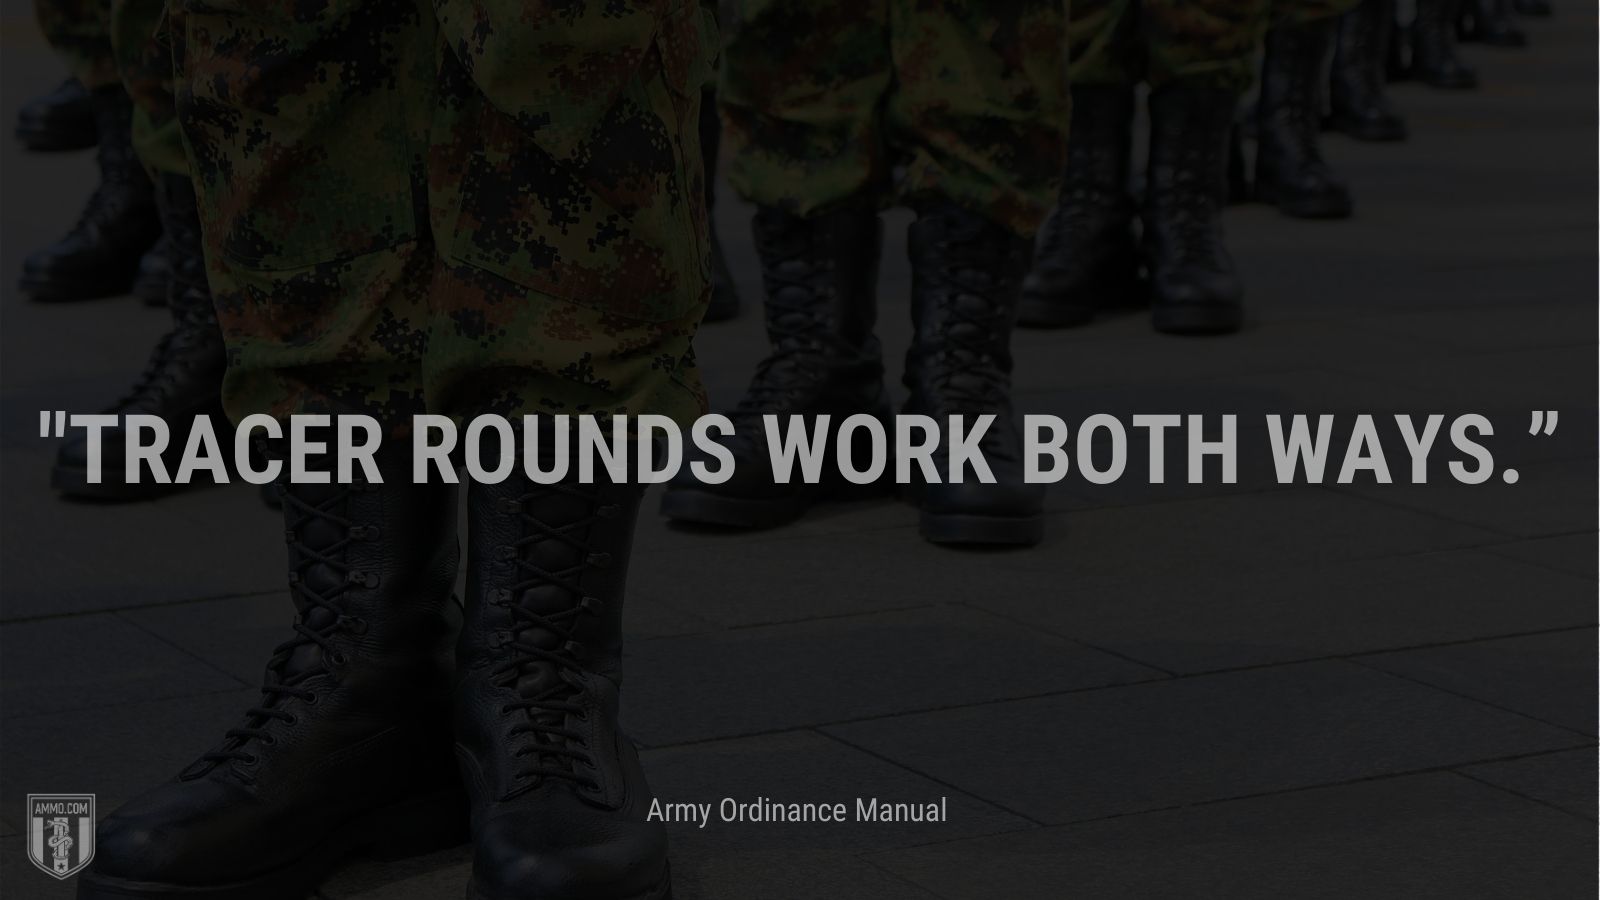 “Tracer rounds work both ways.” - Army Ordinance Manual